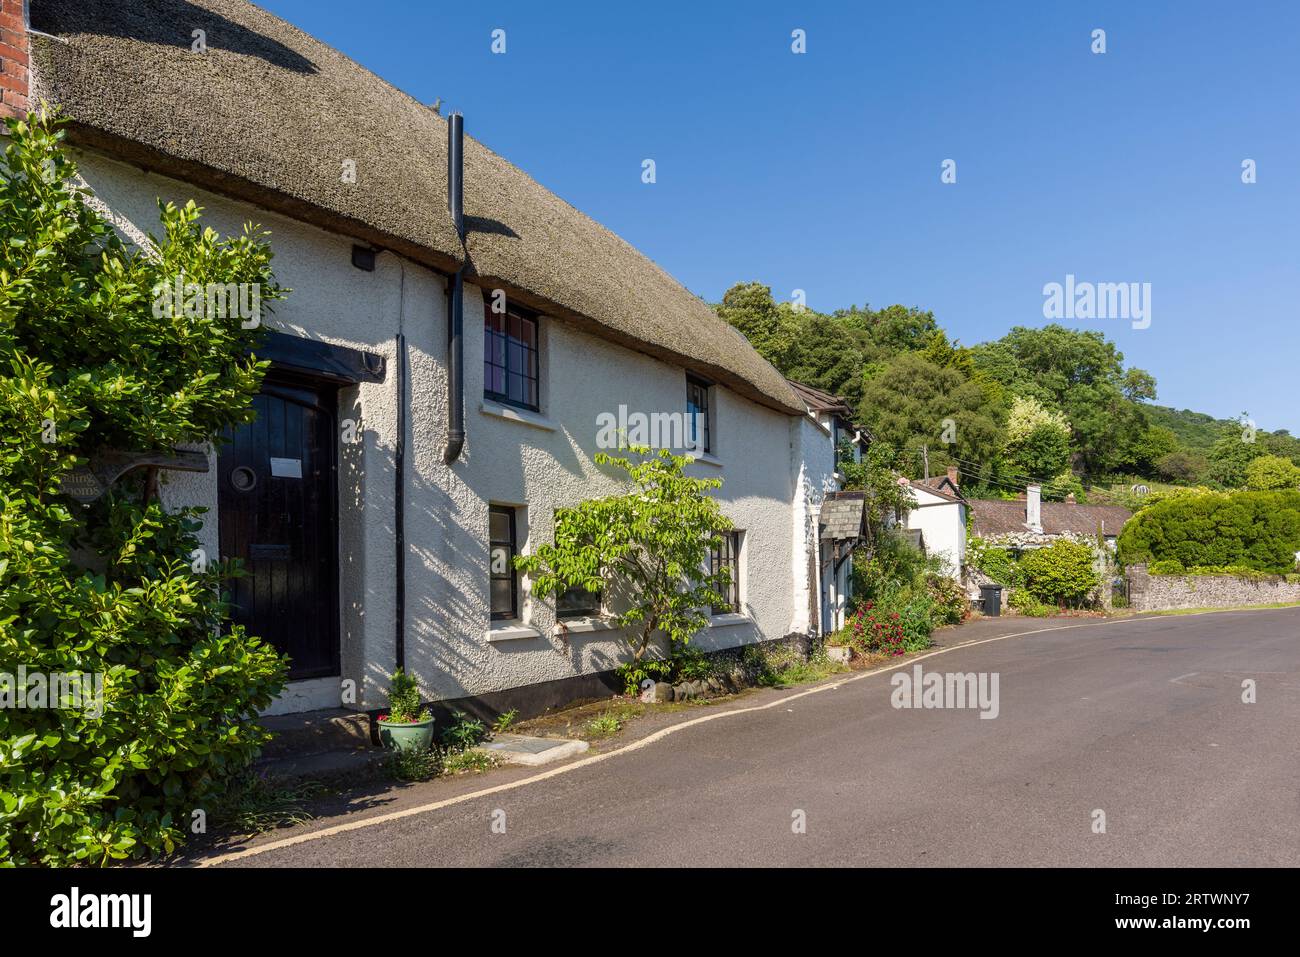 A thatched cottage in Porlock Weir on the Exmoor National Park coast, Somerset, England. Stock Photo